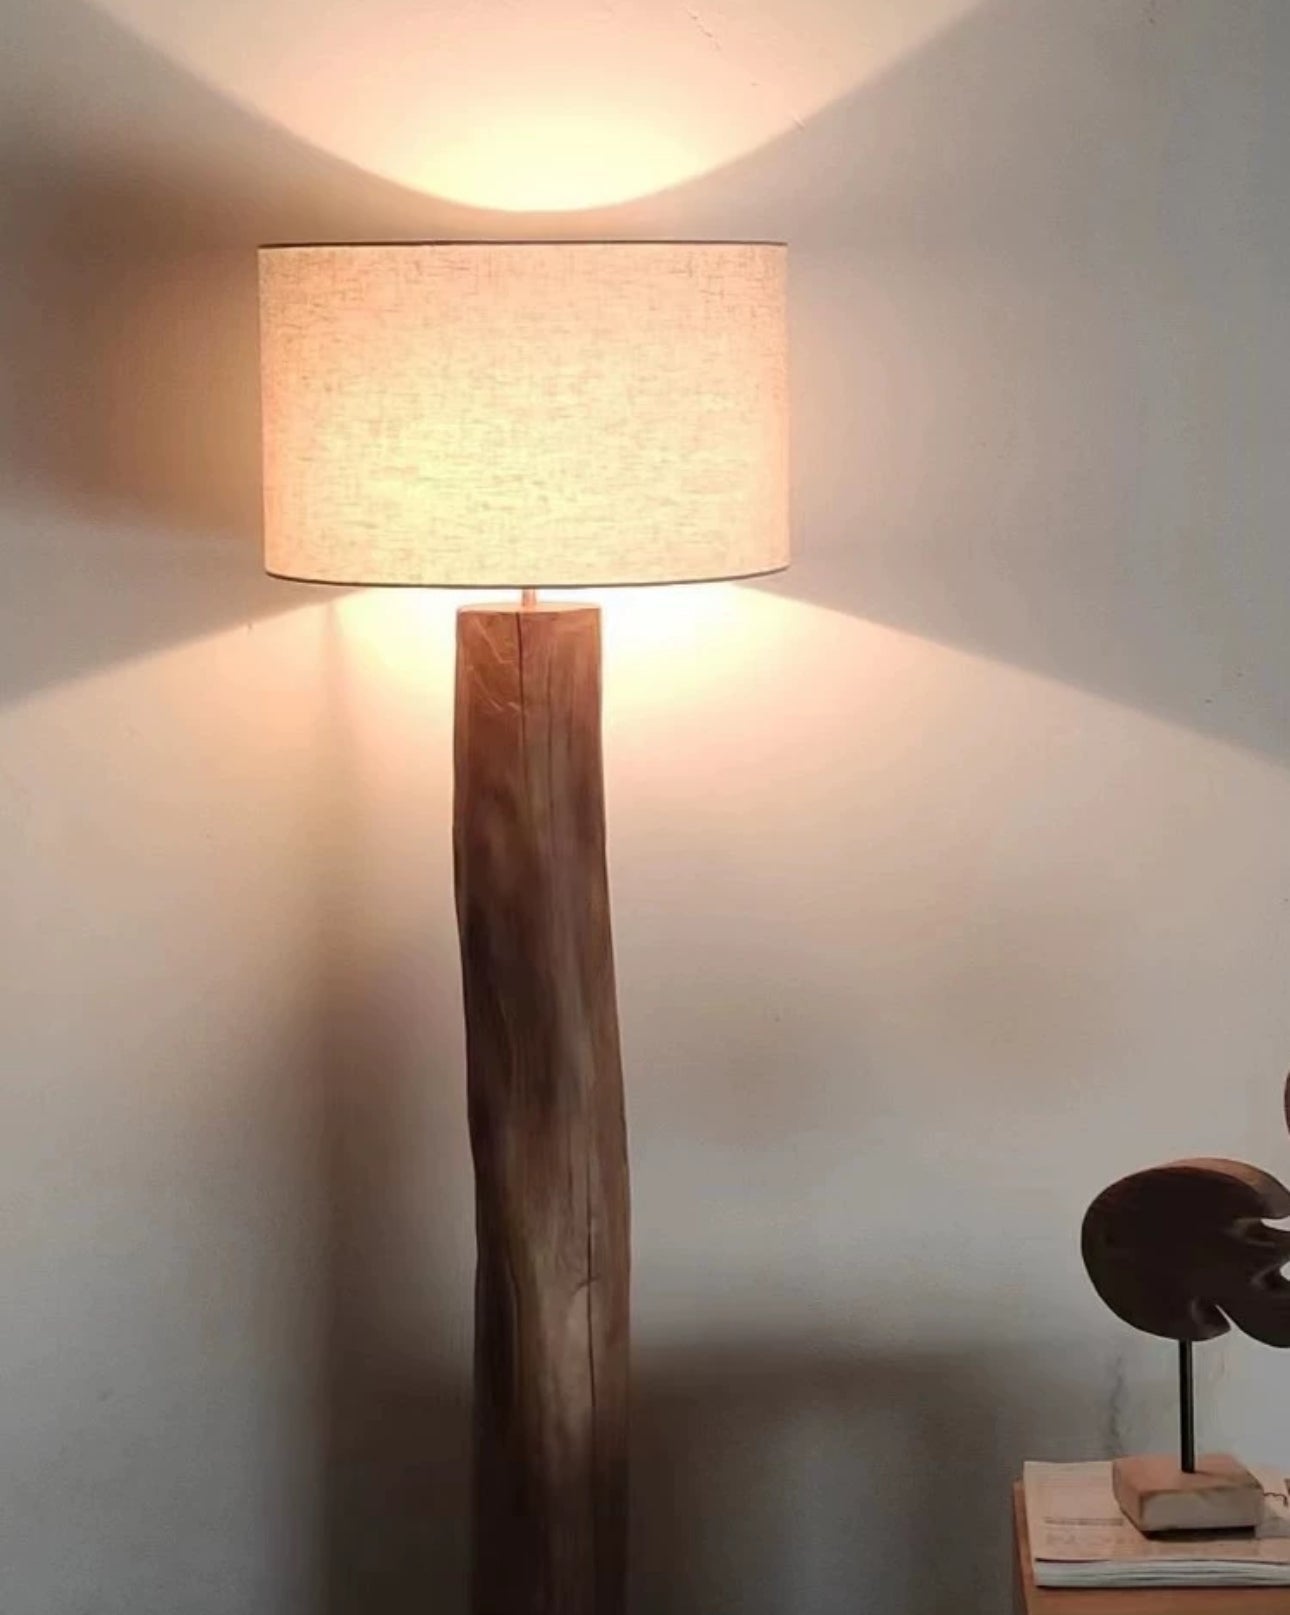 Floor Lamp - Natural Wood Base With Cloth Lampshade 1.3m/1.5m Csa Ul Listed Ce - Minimalist Floor Lamps